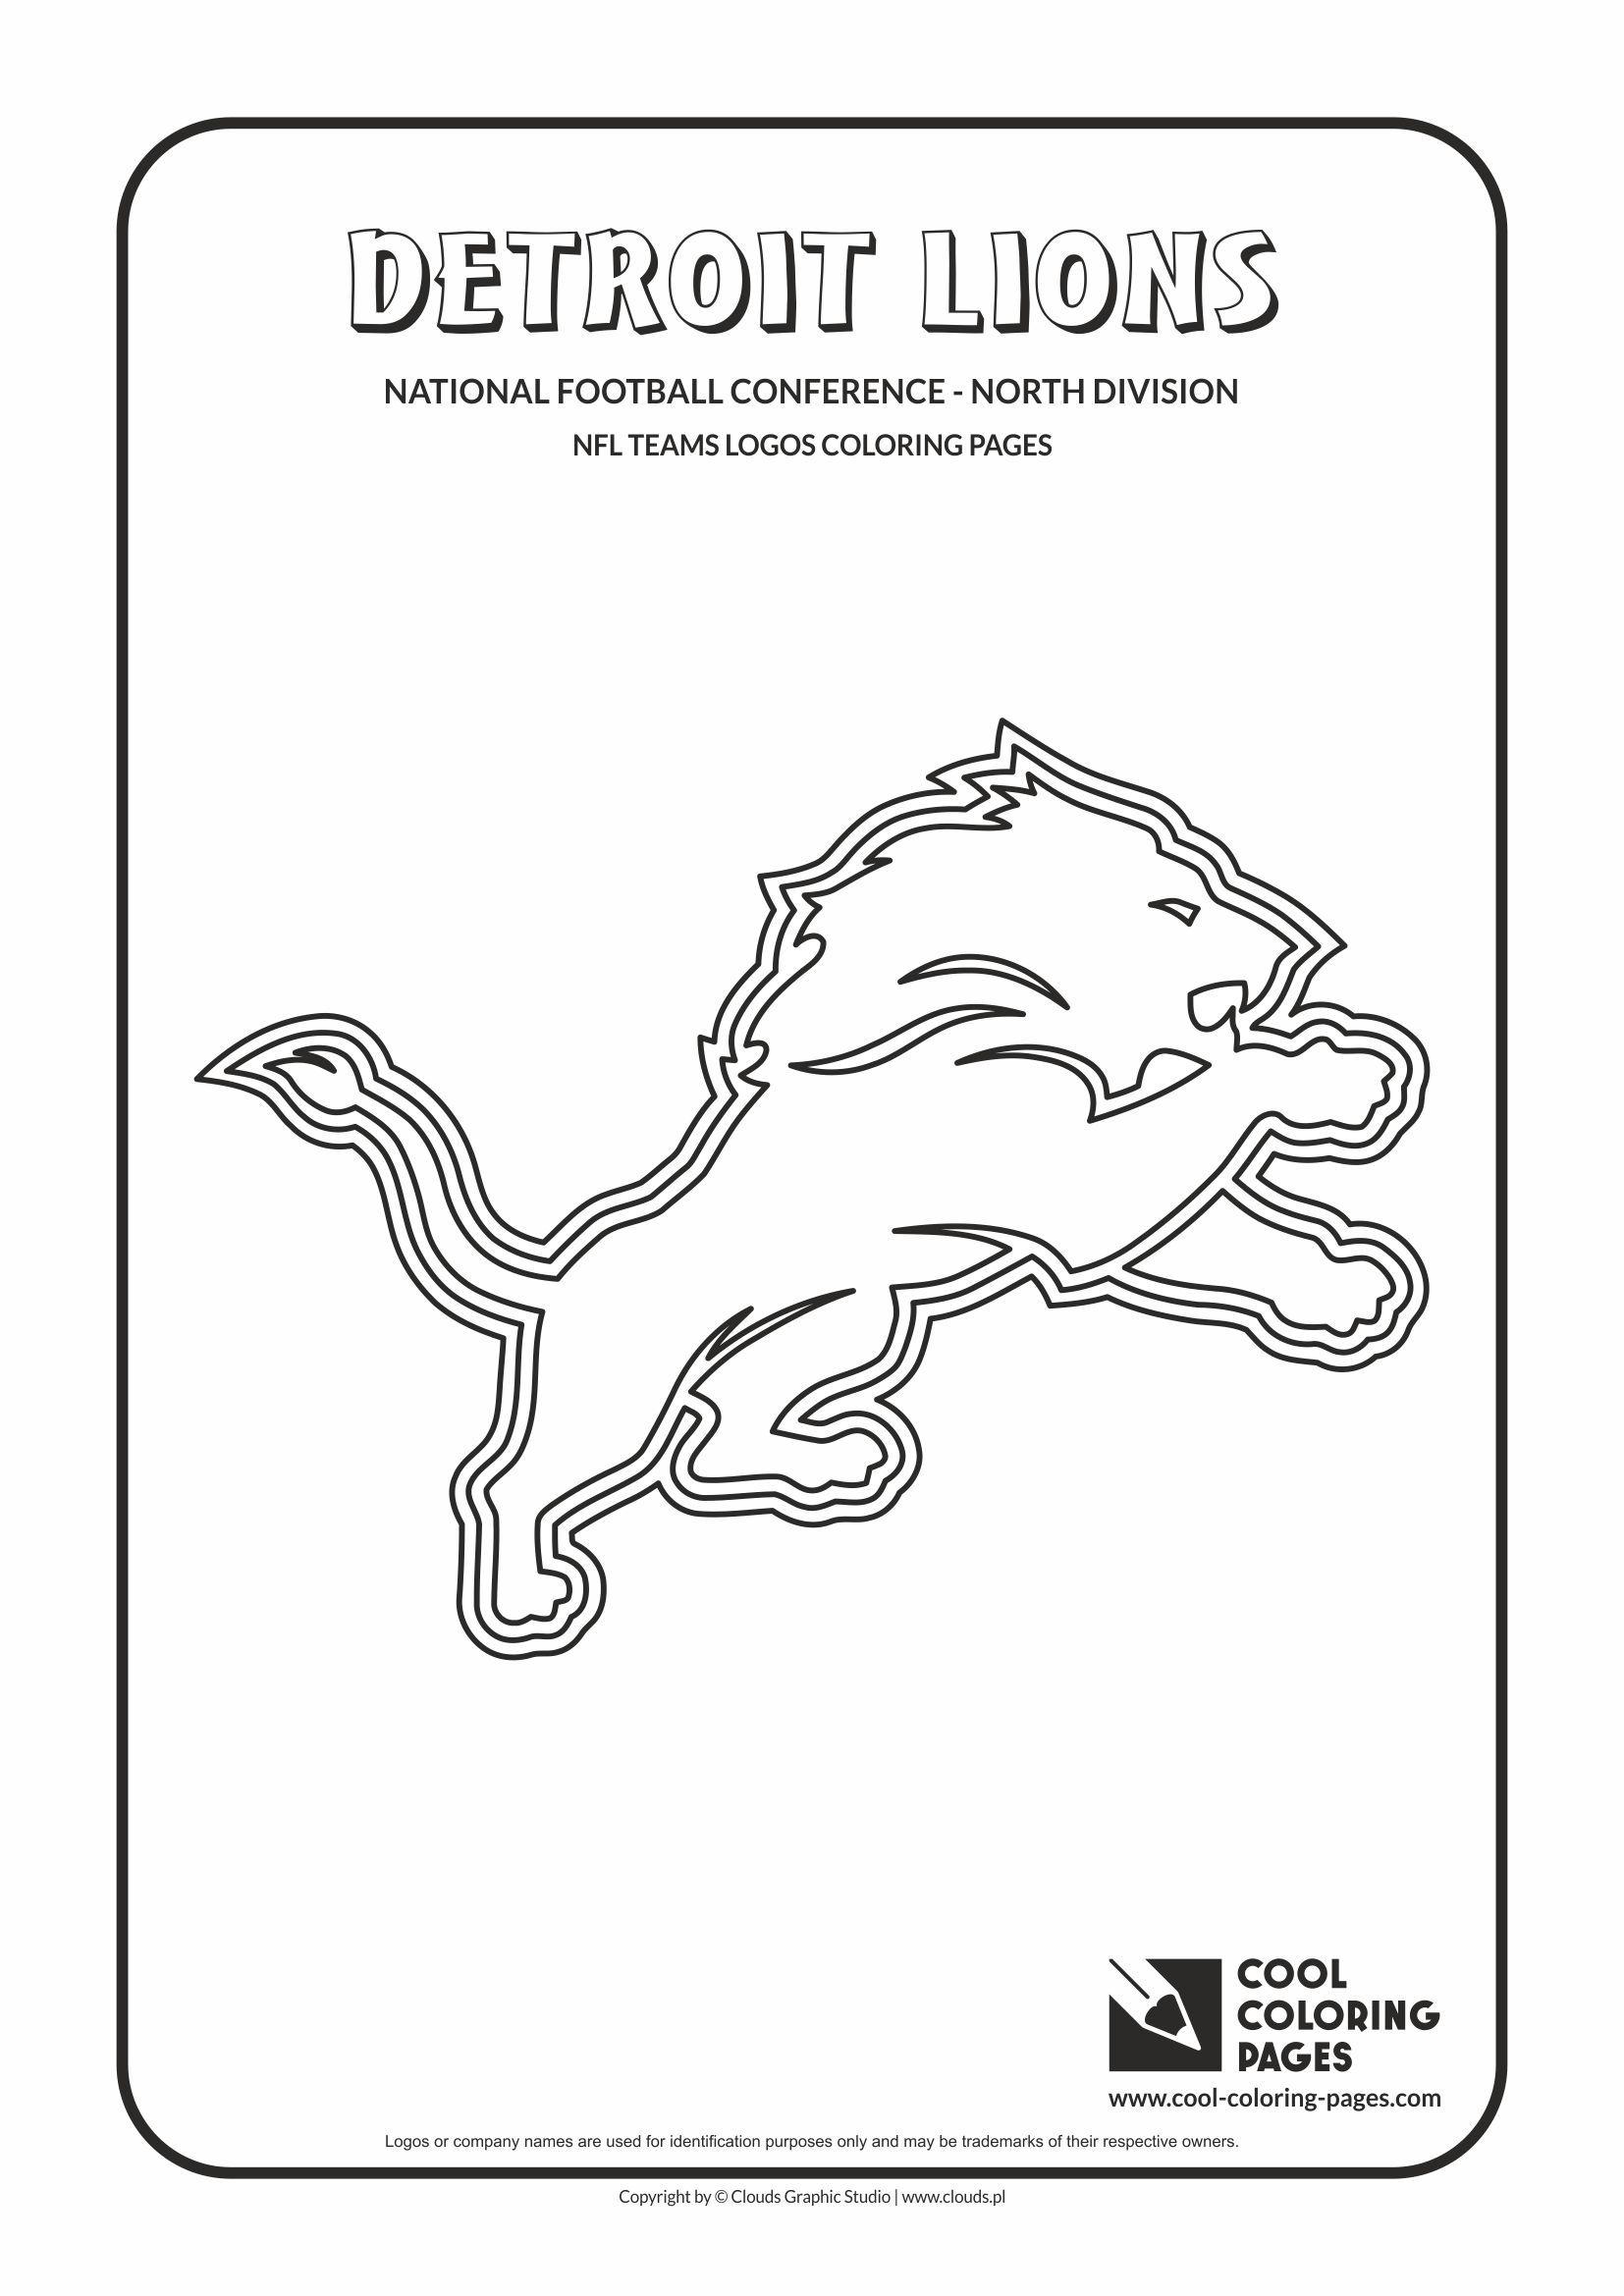 Printable NFL Team Logo - Cool Coloring Pages NFL teams logos coloring pages - Cool Coloring ...